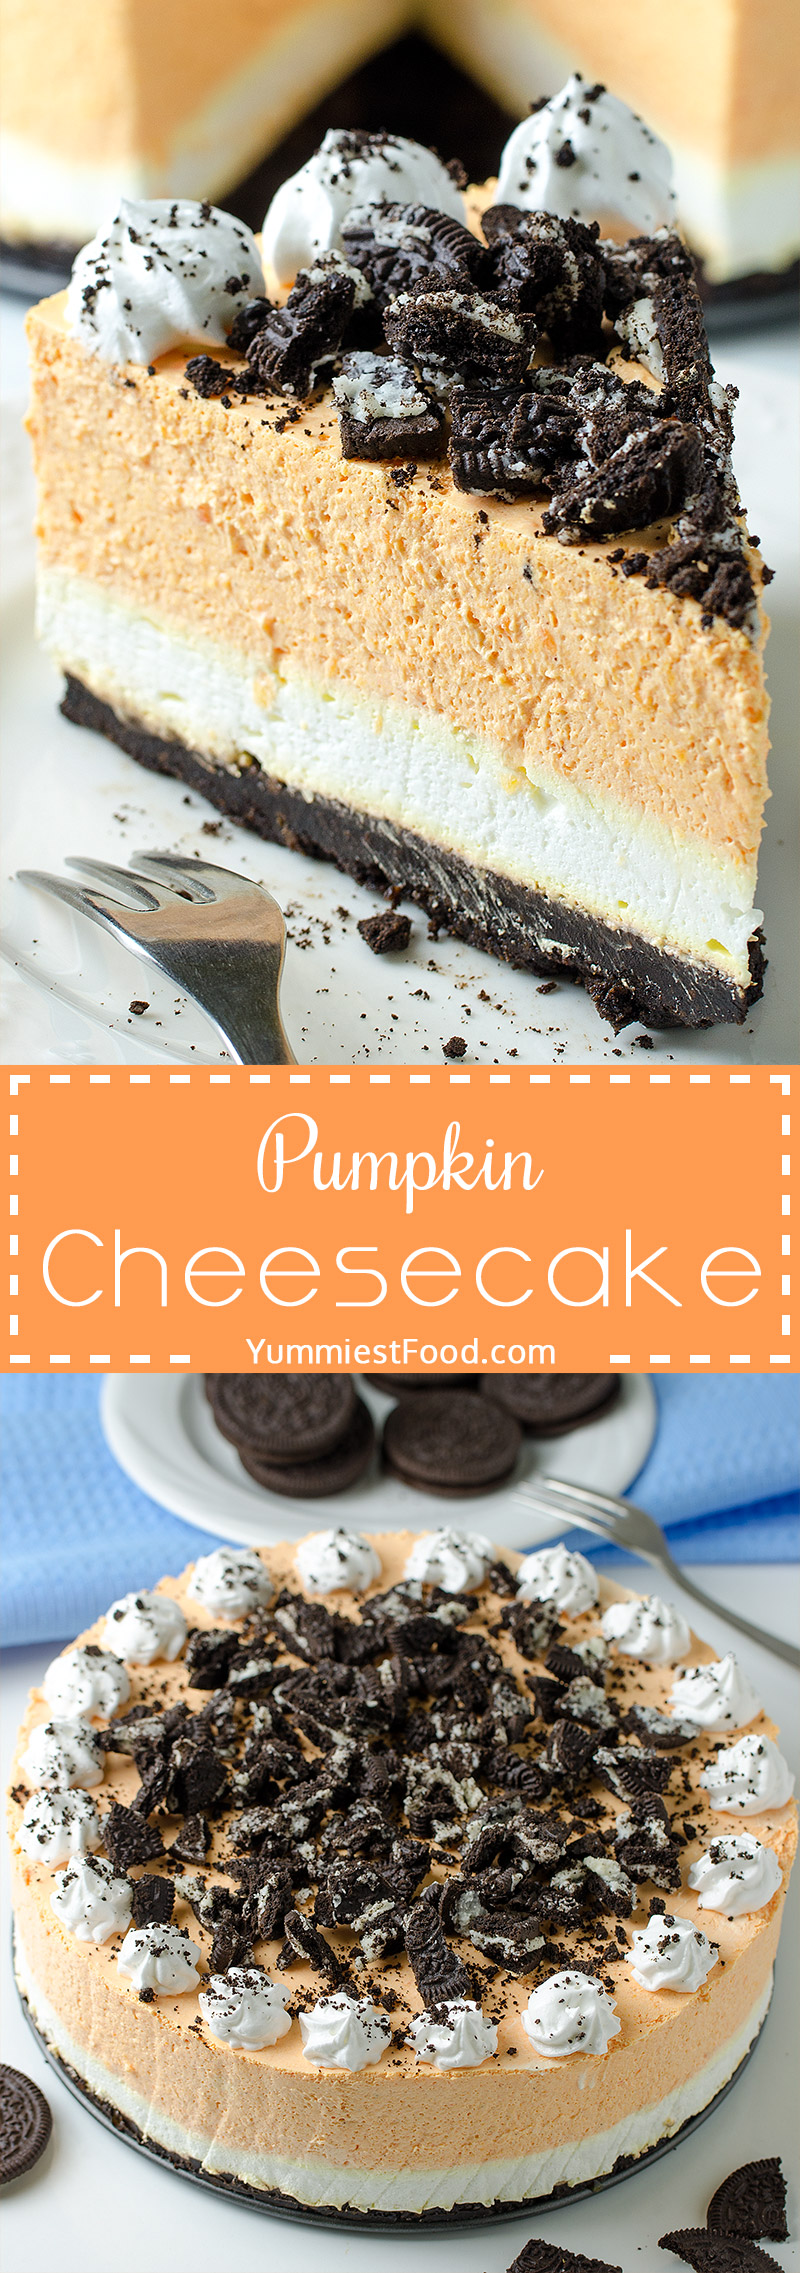 PUMPKIN CHEESECAKE WITH OREO CRUST - NO BAKE – This perfect NO BAKE recipe is creamy, delicious and so very good